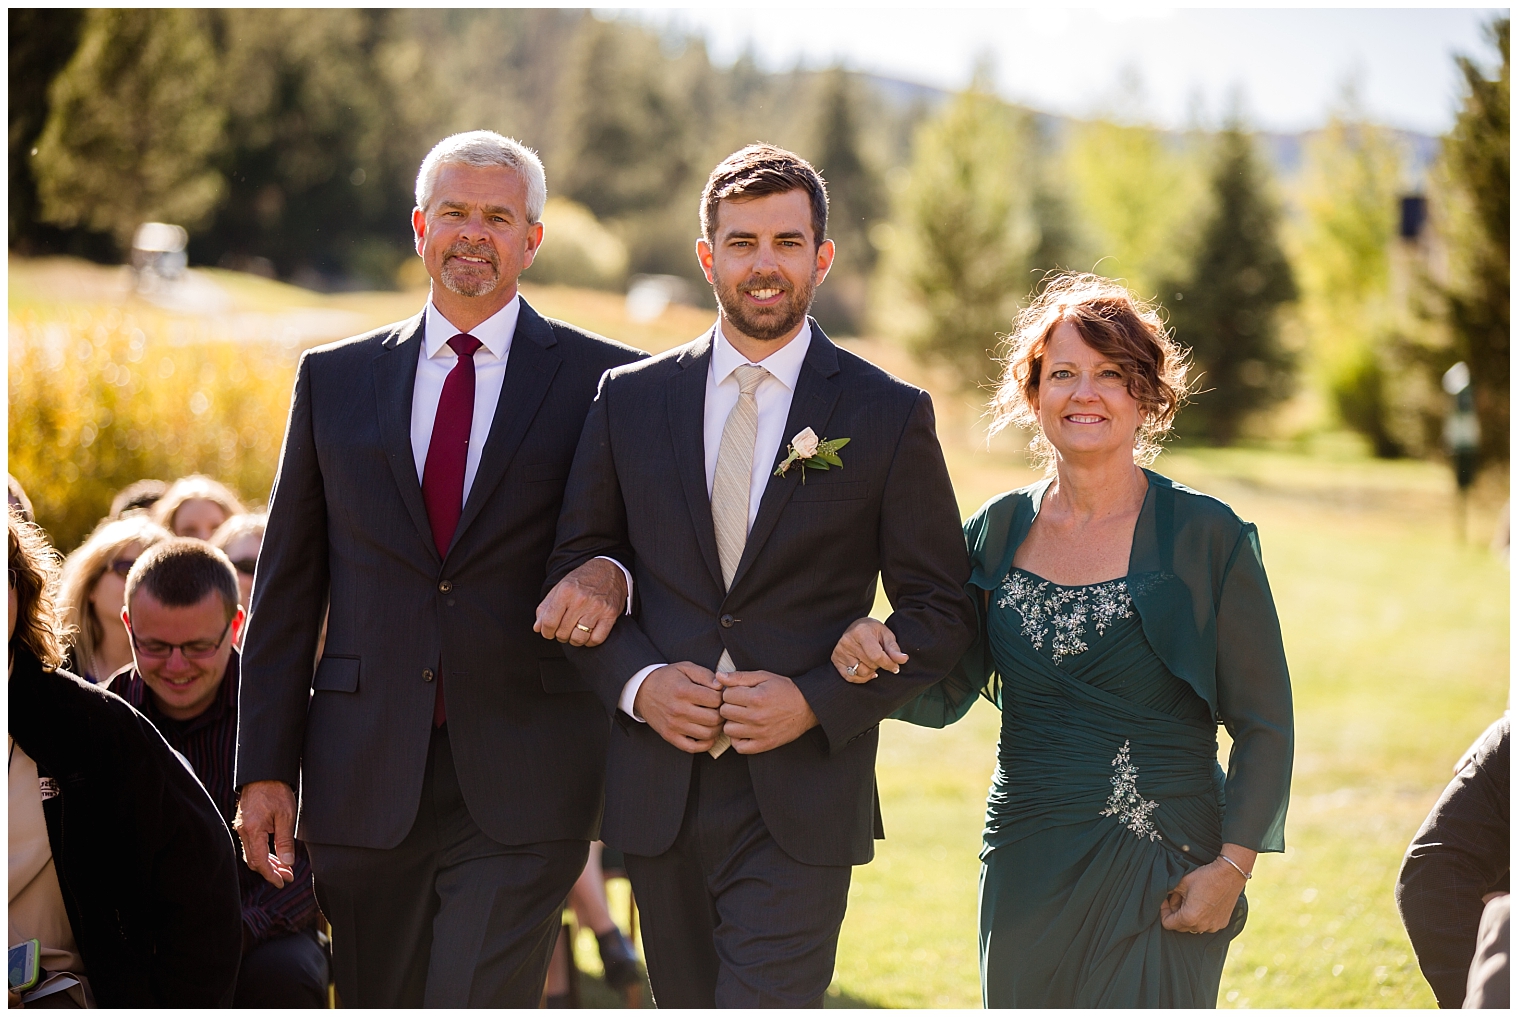 During his Copper Mountain wedding ceremony, the groom walks down the aisle with his parents.